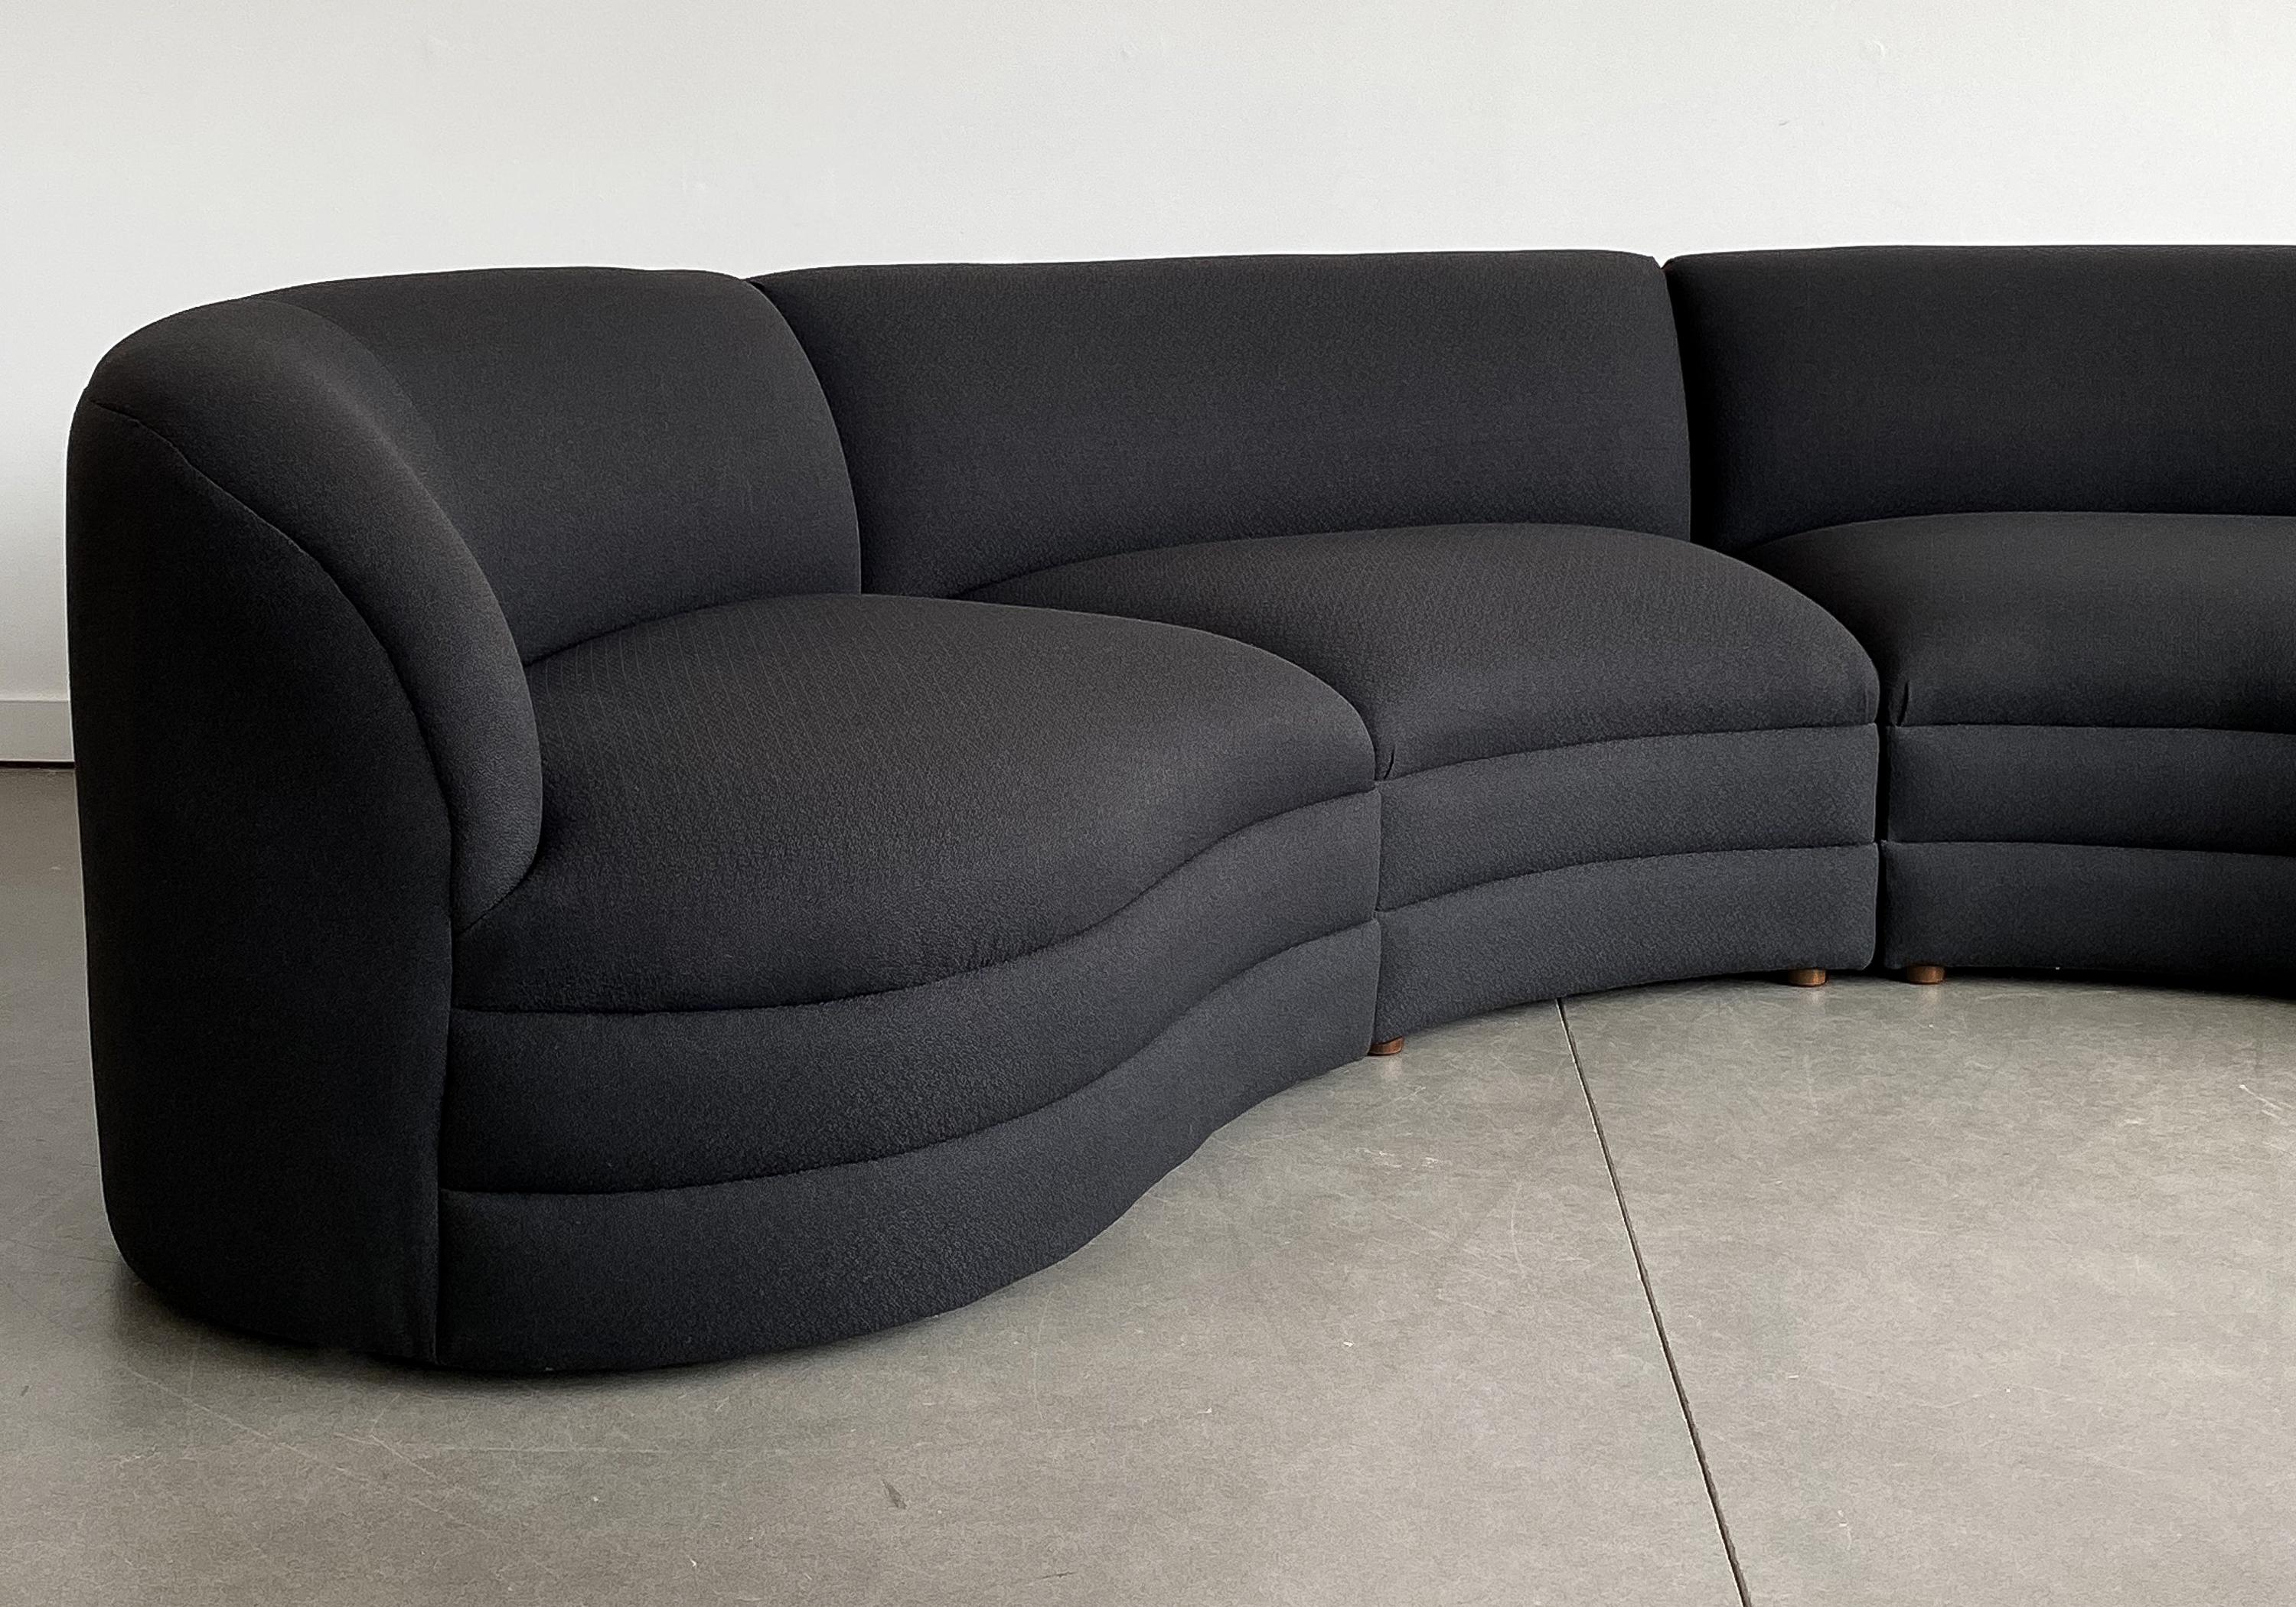 Four Piece Curved Sectional Sofa Attributed to Vladimir Kagan 2